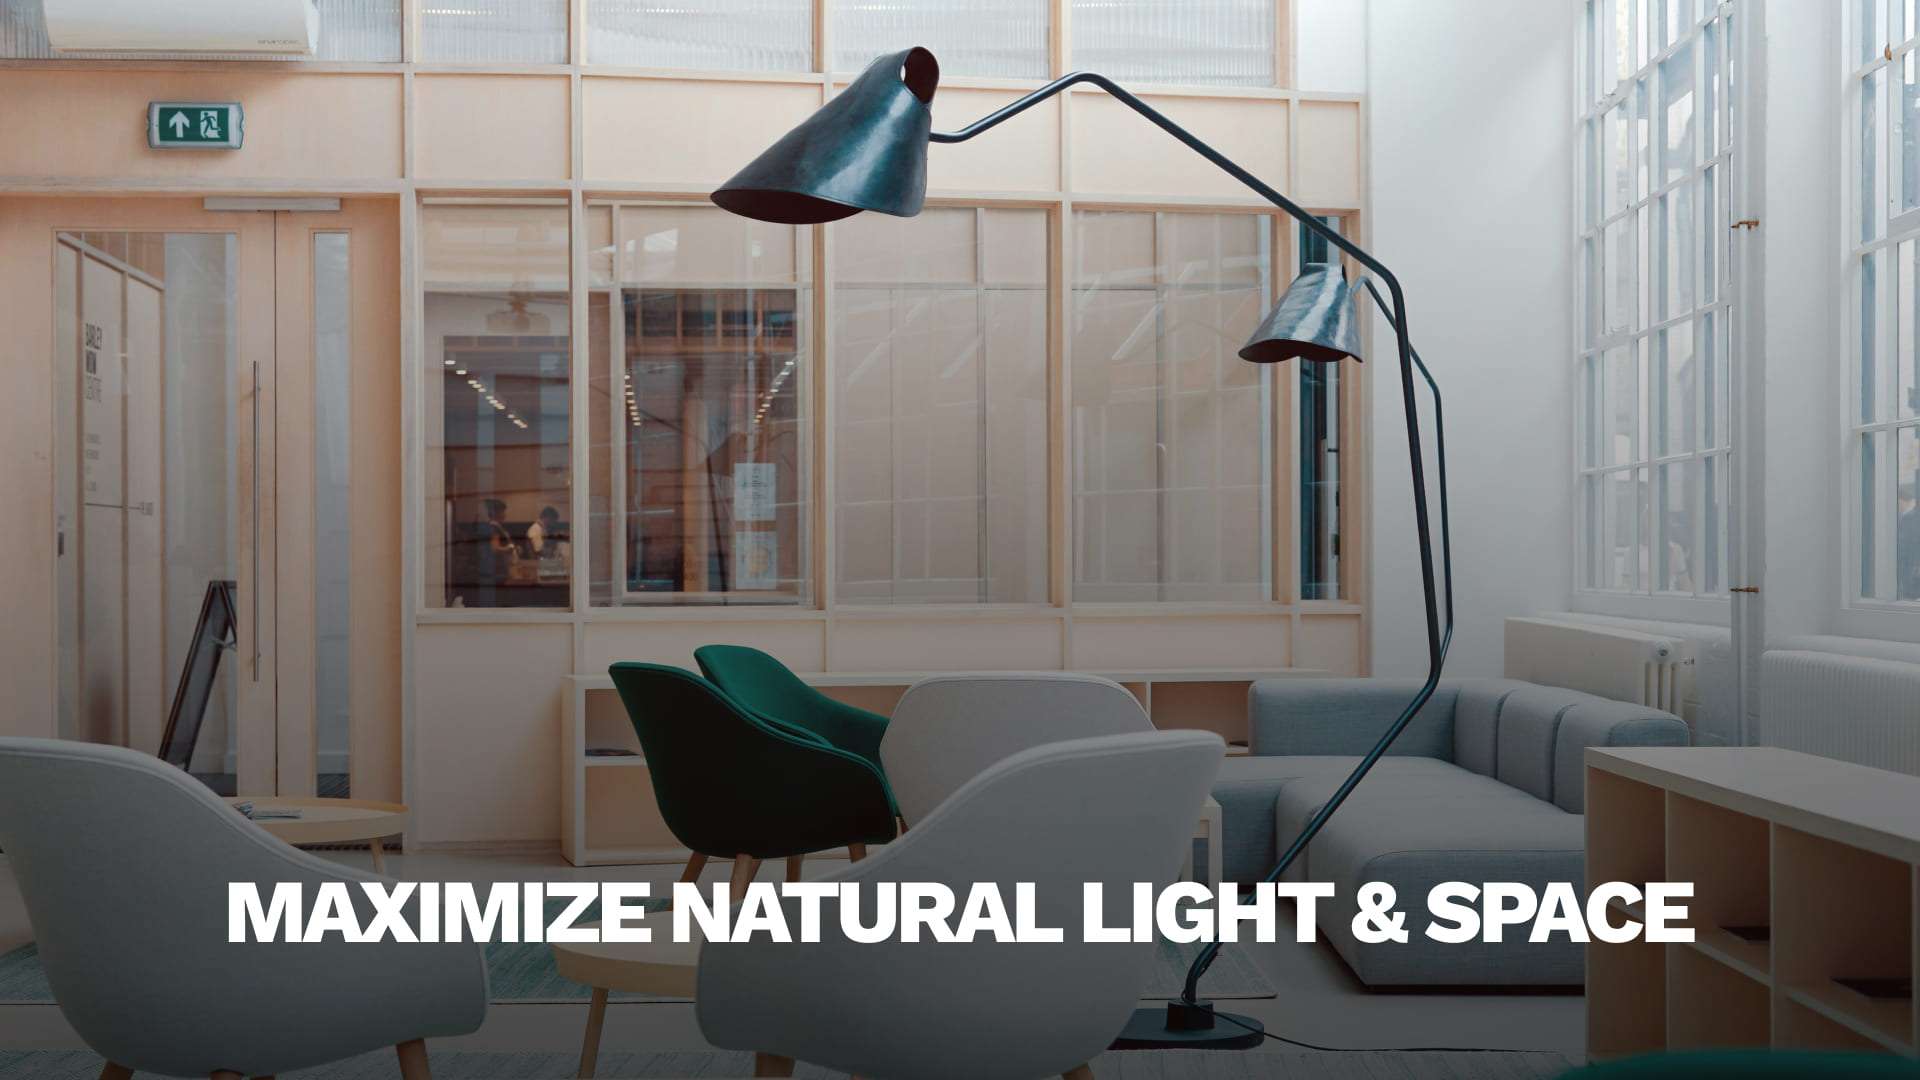 Maximize natural light and space